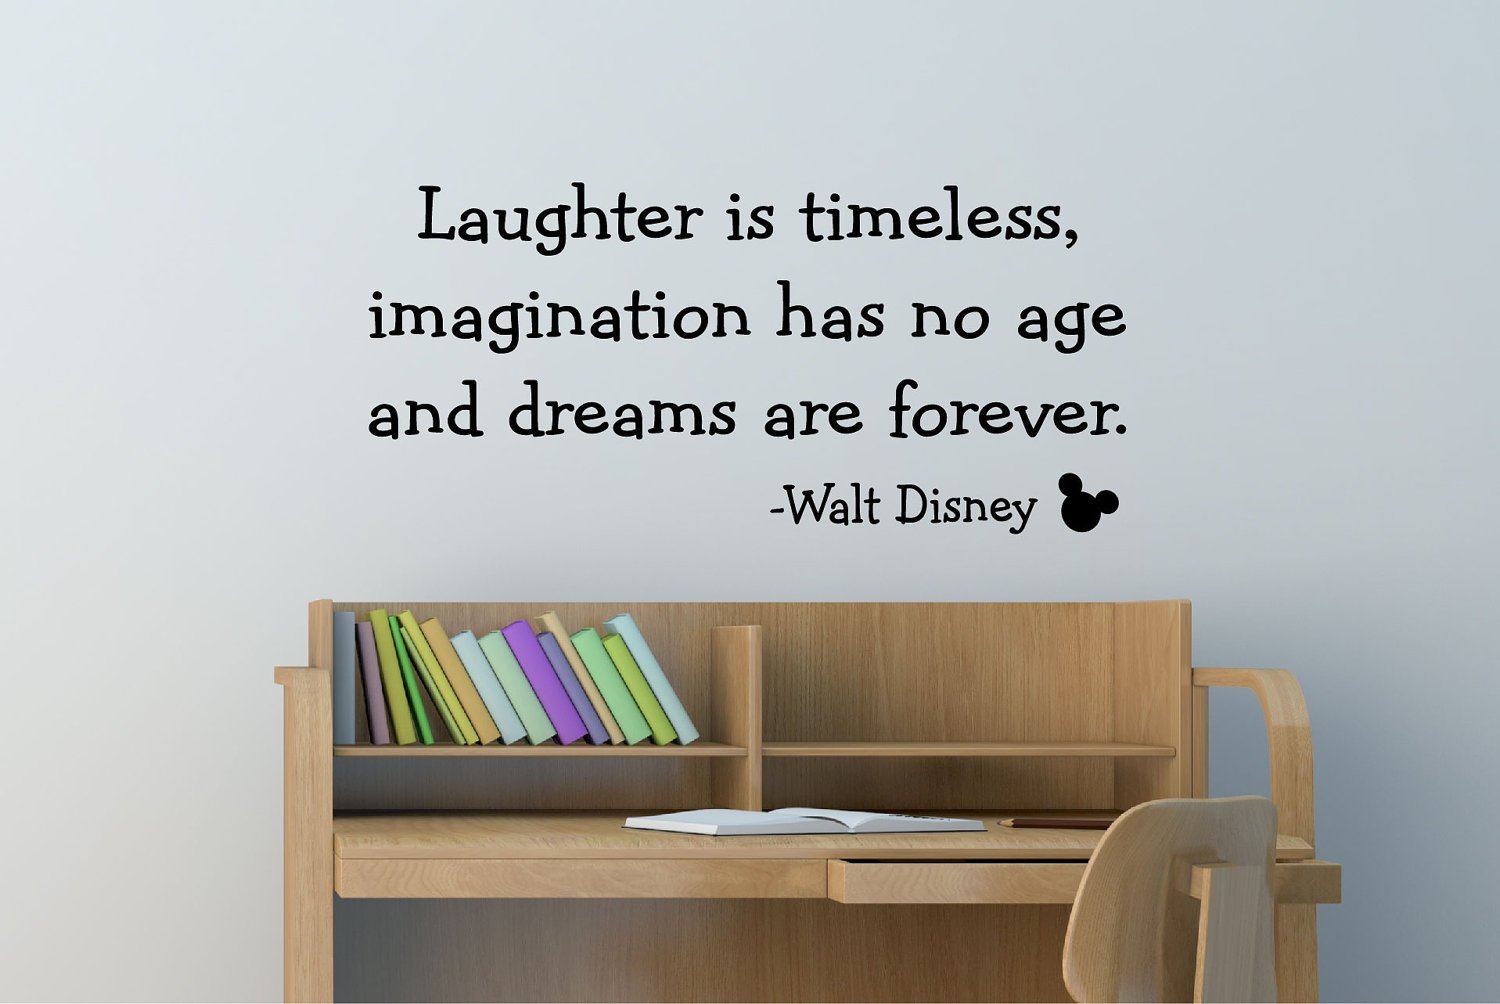 Laughter is timeless, imagination has no age, and dreams are forever. (4)